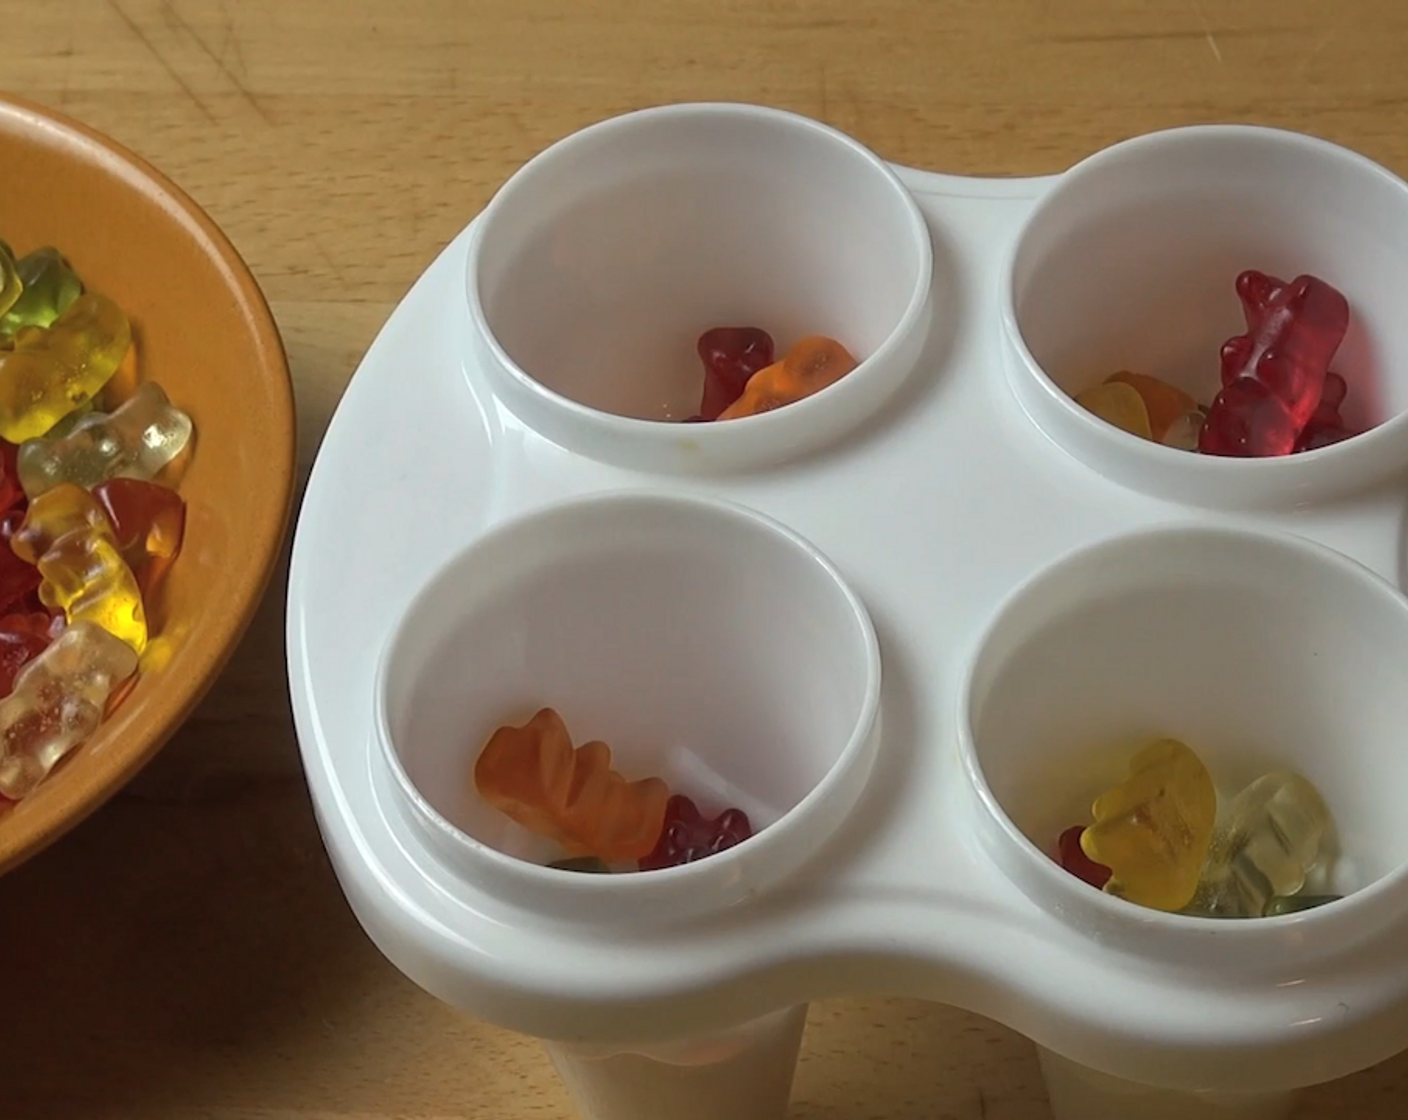 step 1 Loosely fill each cup of an ice mold evenly halfway to 3/4 way up with Gummy Bears (1/2 cup).